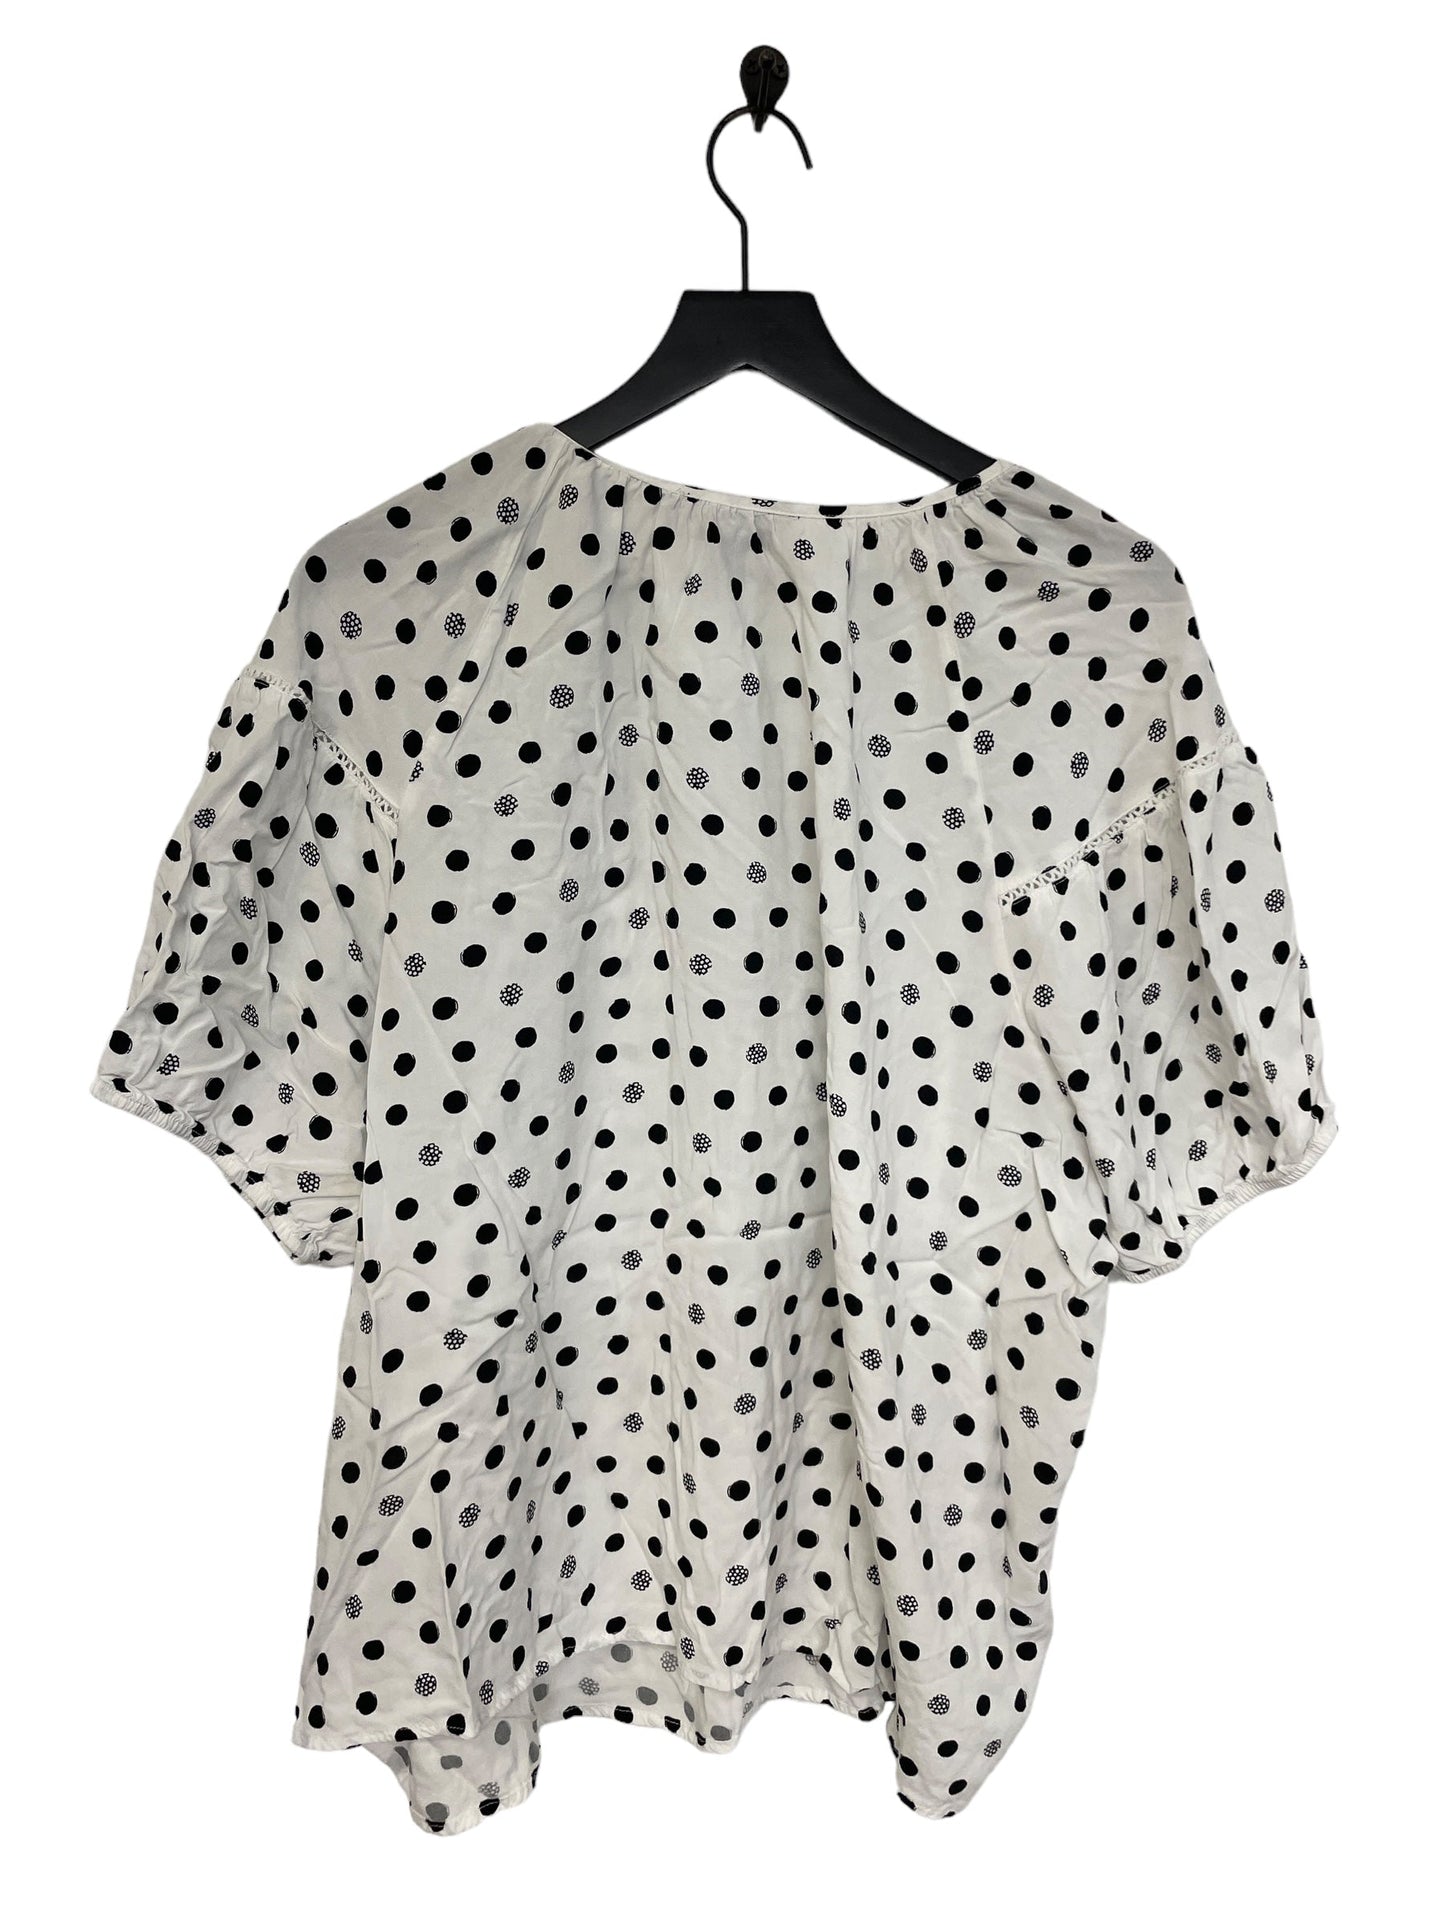 Polkadot Pattern Top 3/4 Sleeve Clothes Mentor, Size 3x